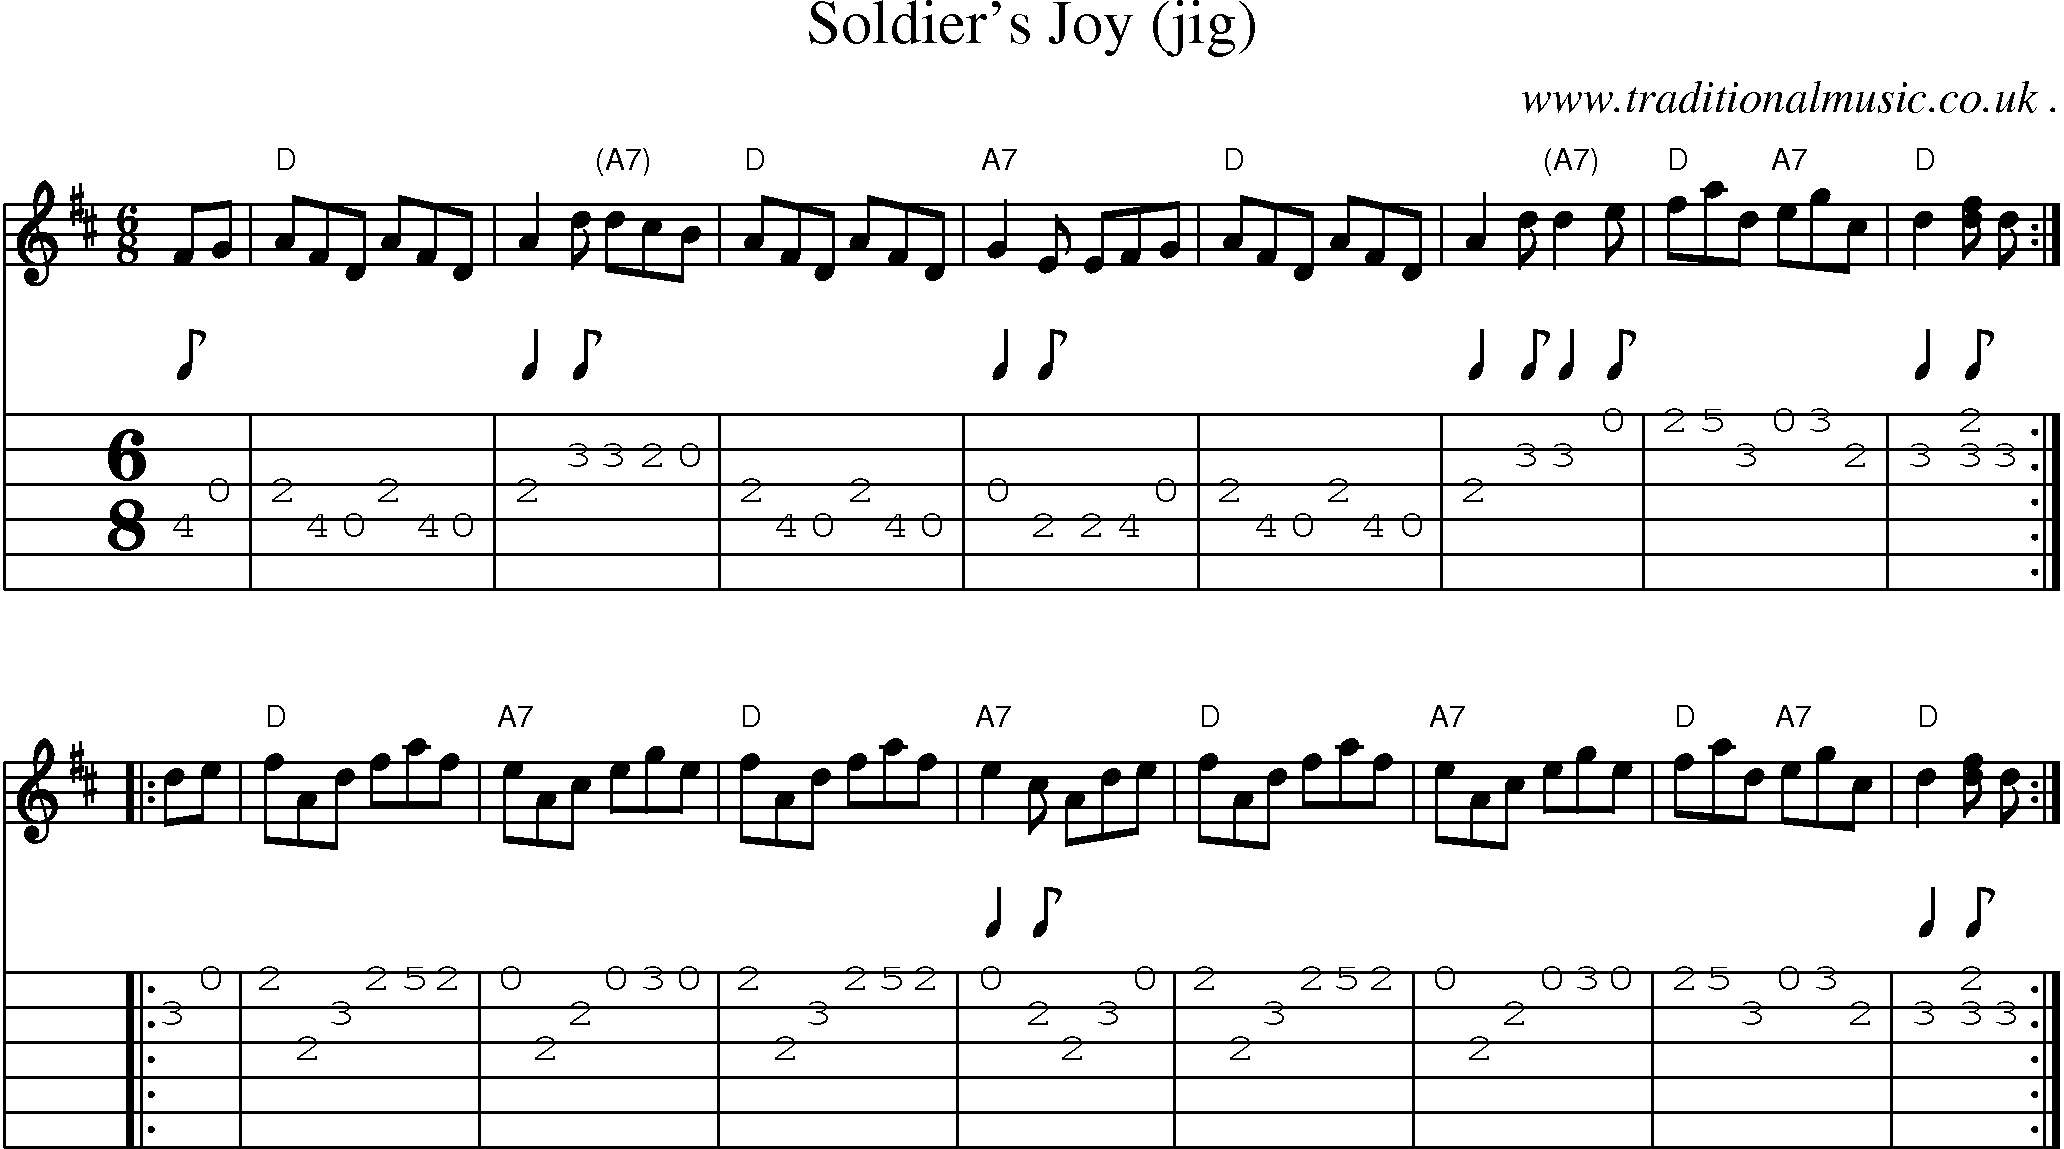 Sheet-music  score, Chords and Guitar Tabs for Soldiers Joy Jig